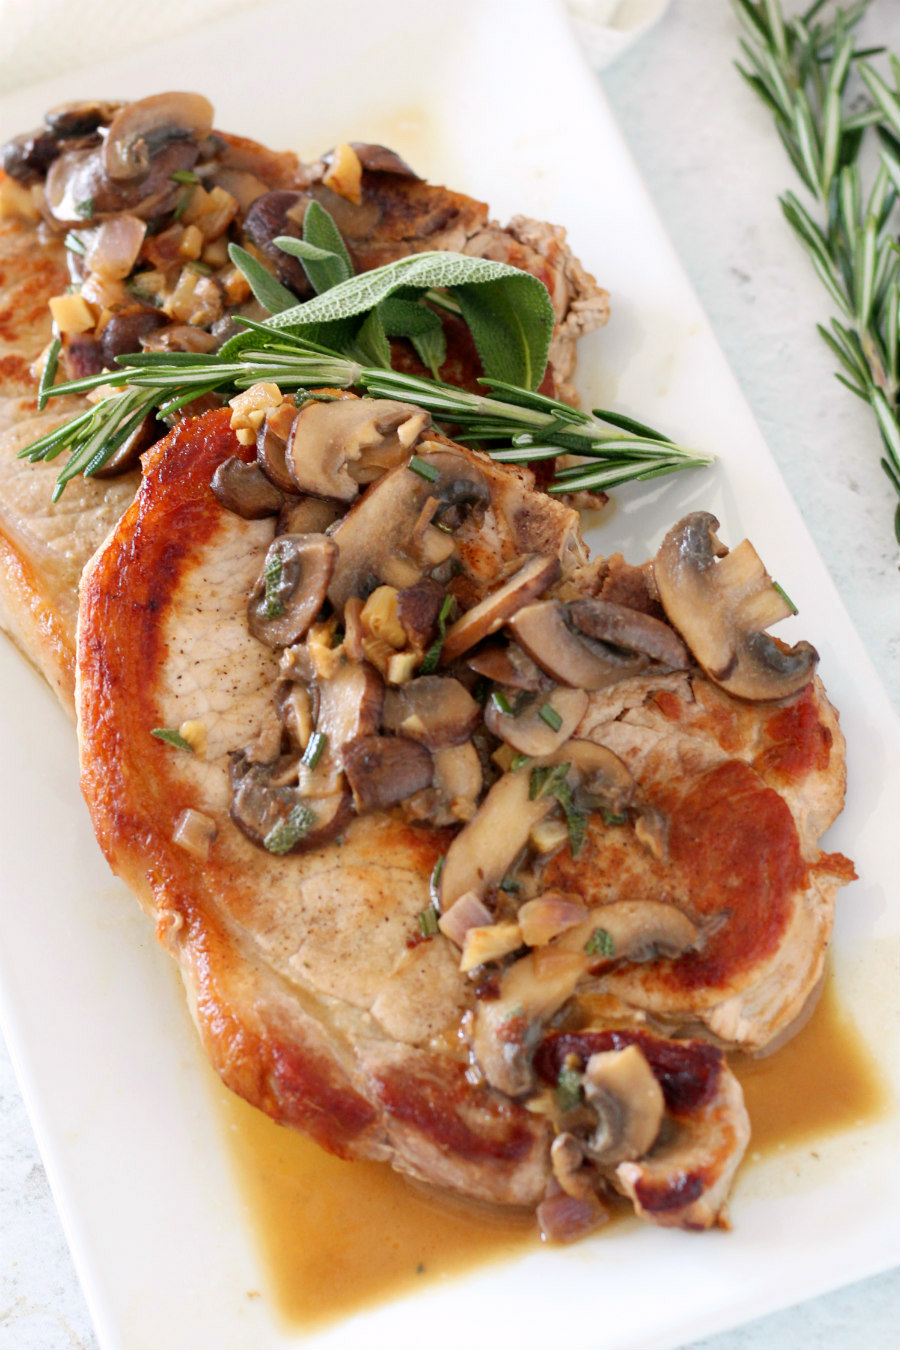 This 30-minute meal, Dijon Mustard Sauce Pork Chops for 2, is a French-inspired dish that's perfect for a weeknight dinner or romantic date night. This budget-friendly dinner is sure to be loved by all!